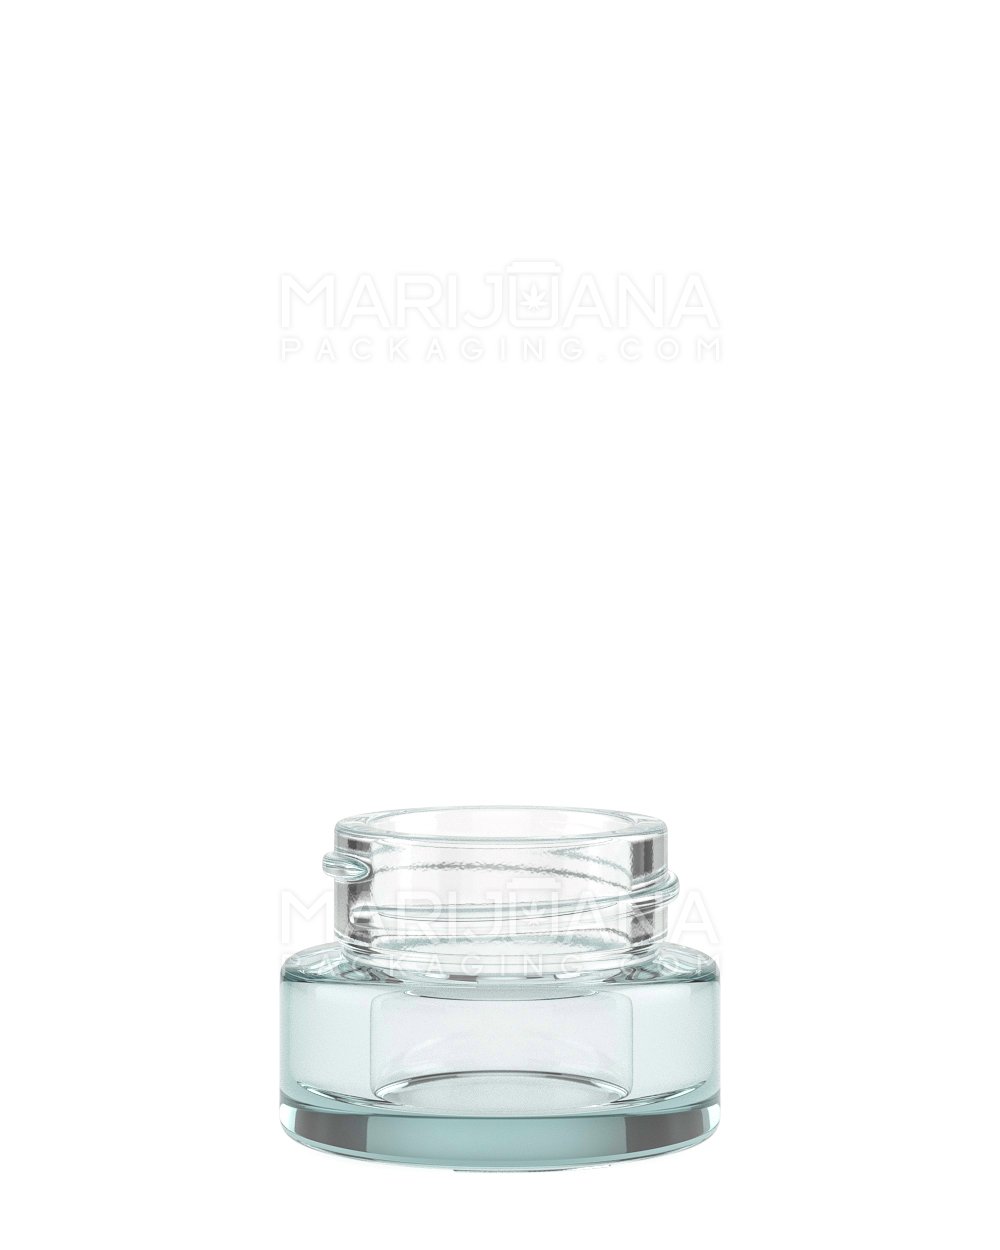 Clear Glass Concentrate Containers | 29mm - 5mL - 504 Count - 1